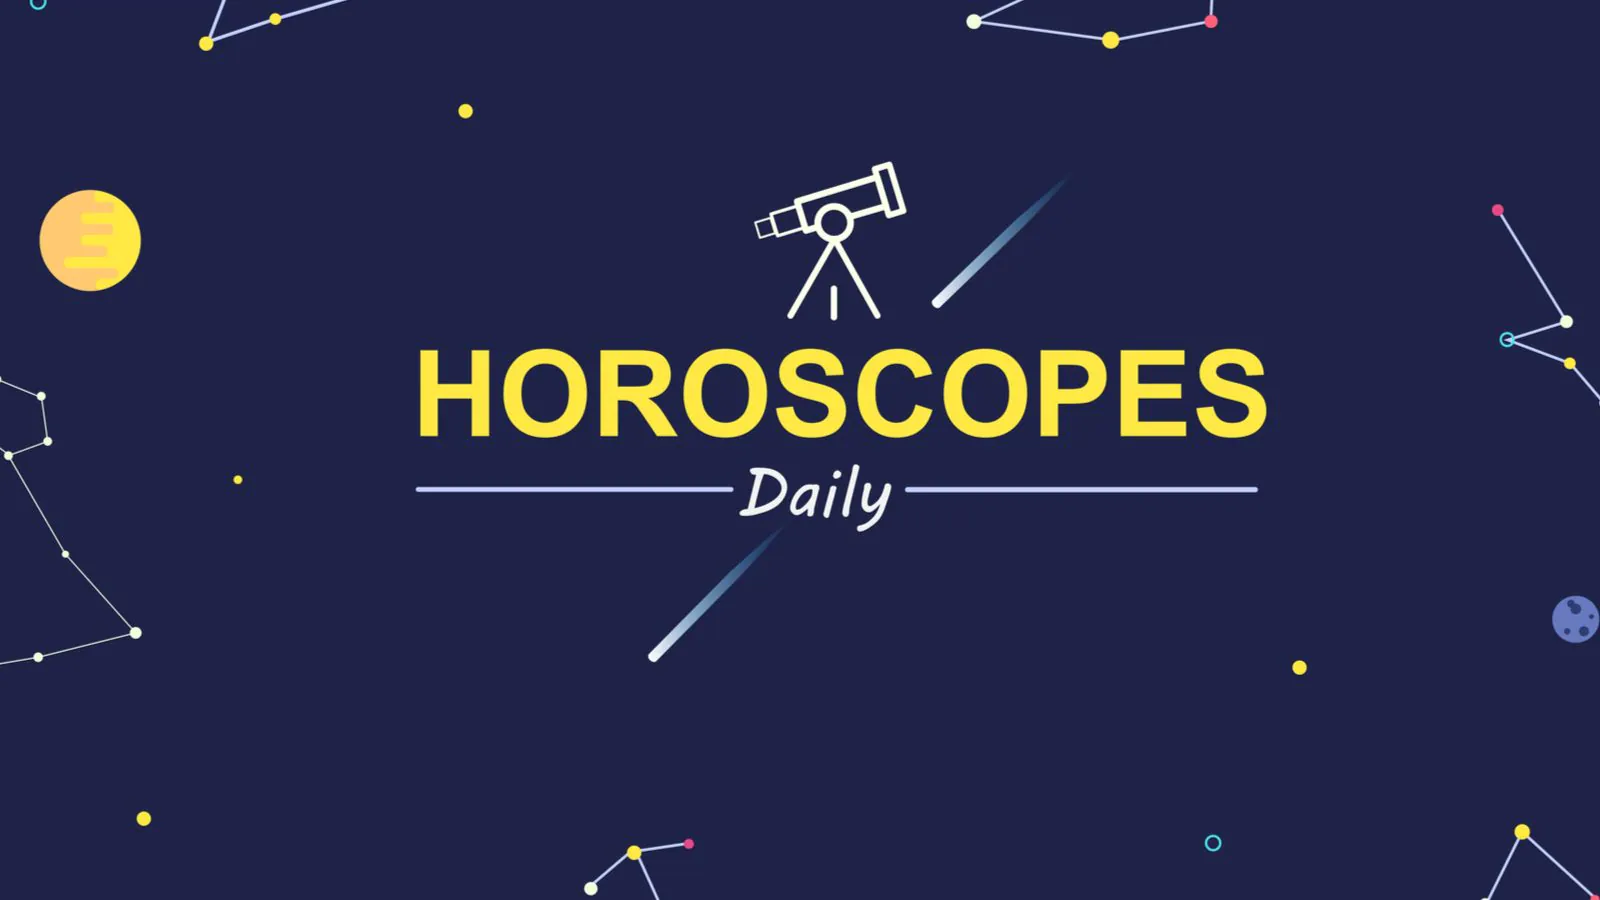 Check Out Daily Astrological Prediction for Aries, Taurus, Libra, Sagittarius And Other Zodiac Signs for Monday